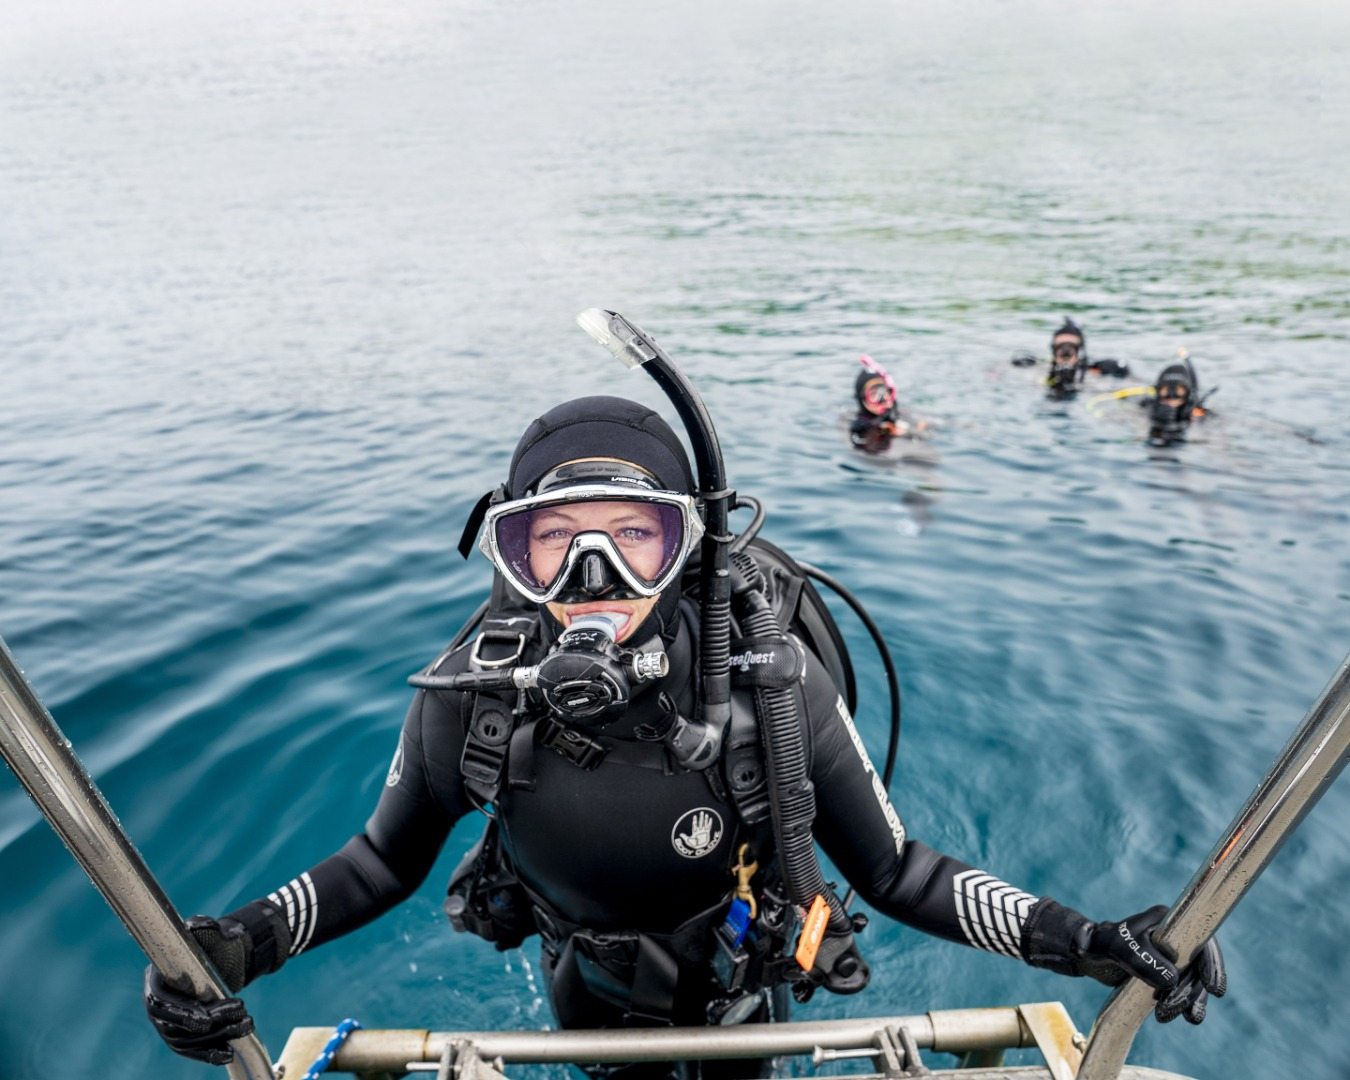 diver ascending the ladder into the boat as an open water diver